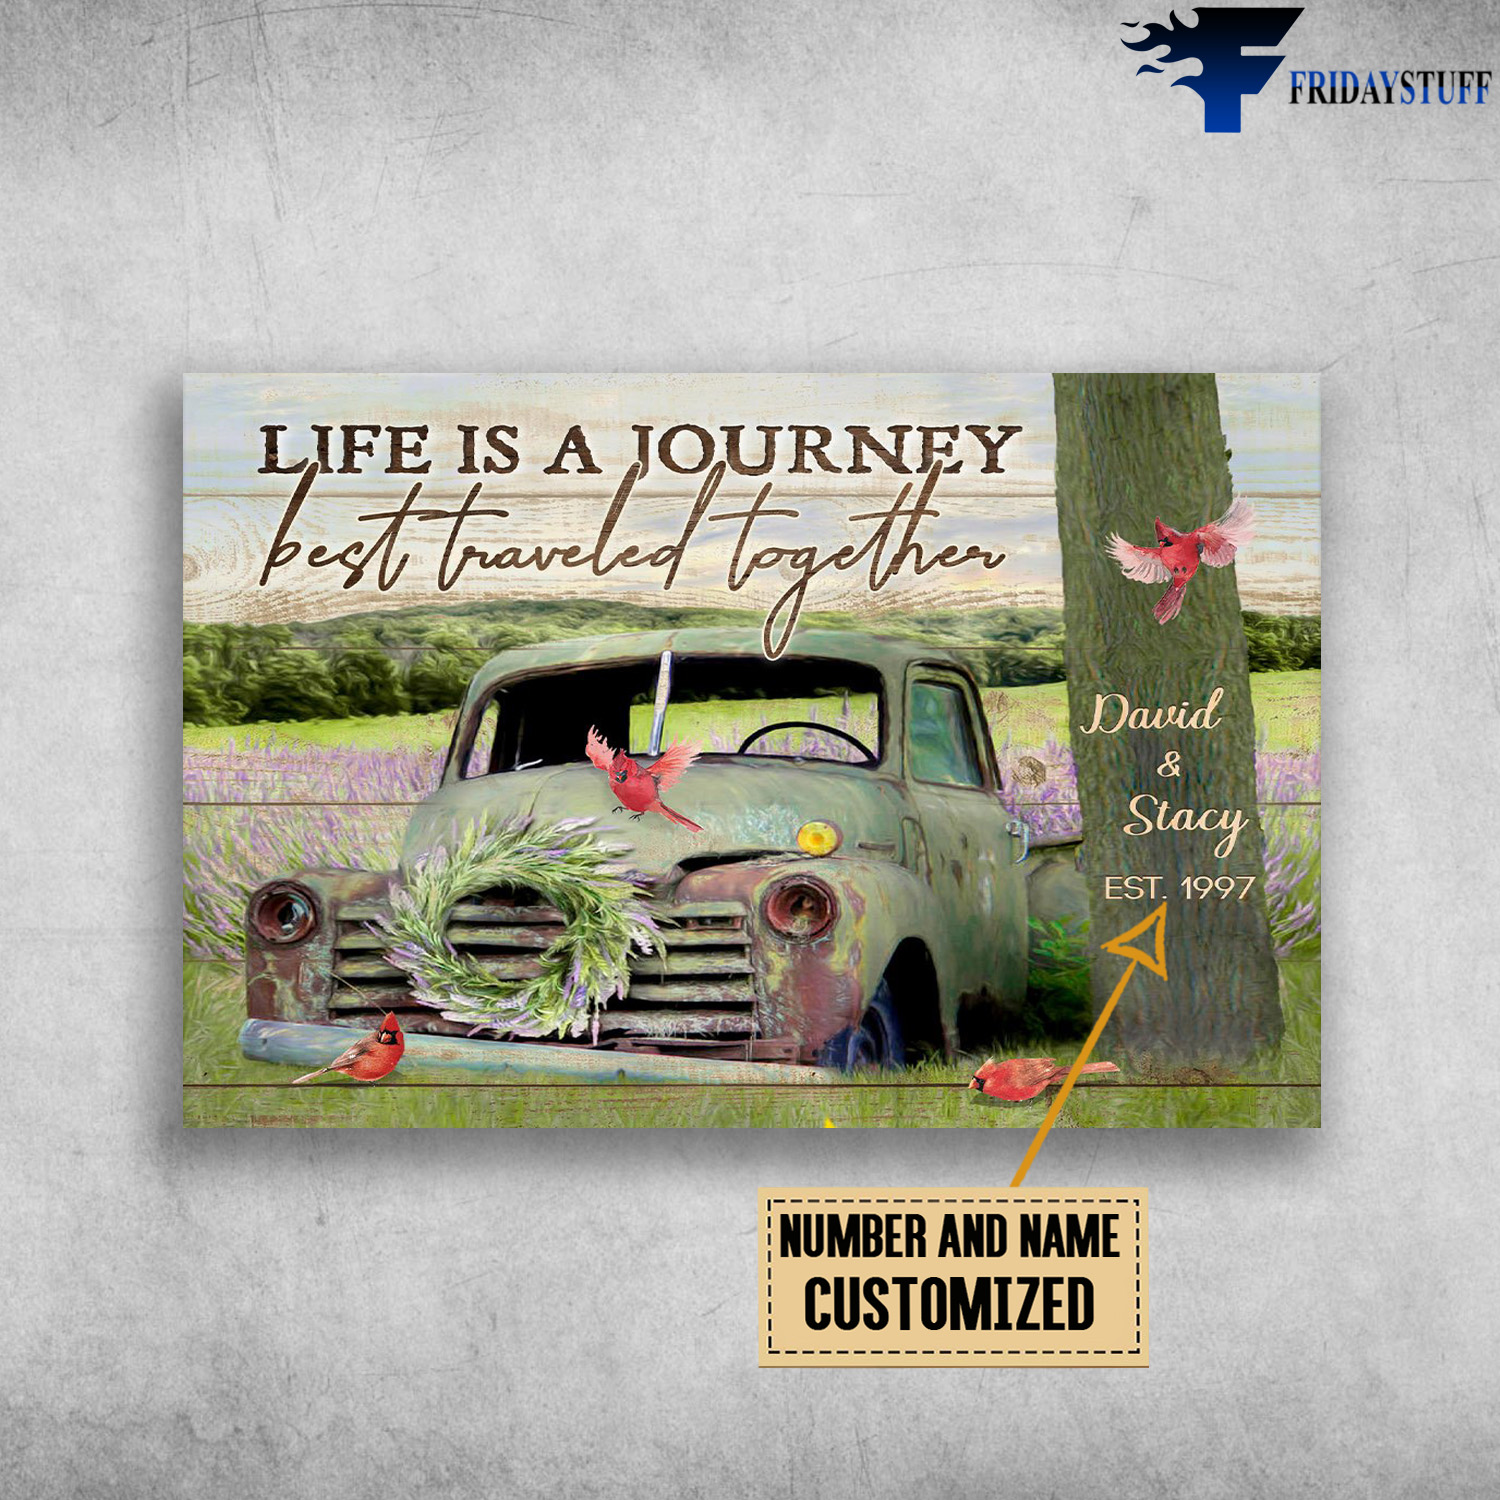 Cardinal Bird And Truck, Life Is A Journey, Best Traveled Together  Customized Personalized NAME/YEARS